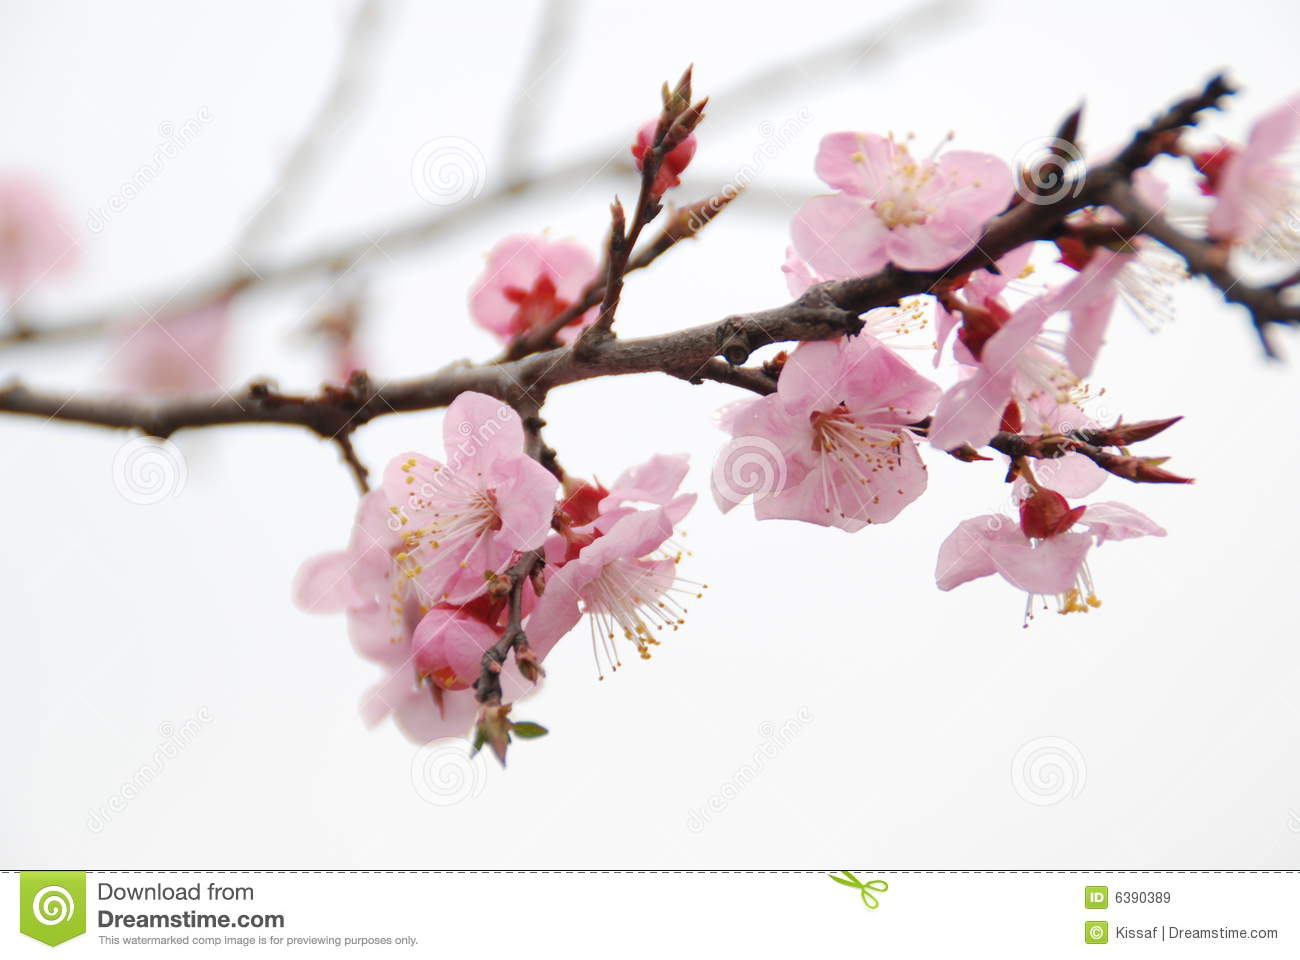 Peach Blossom Royalty Free Stock Images   Image  6390389